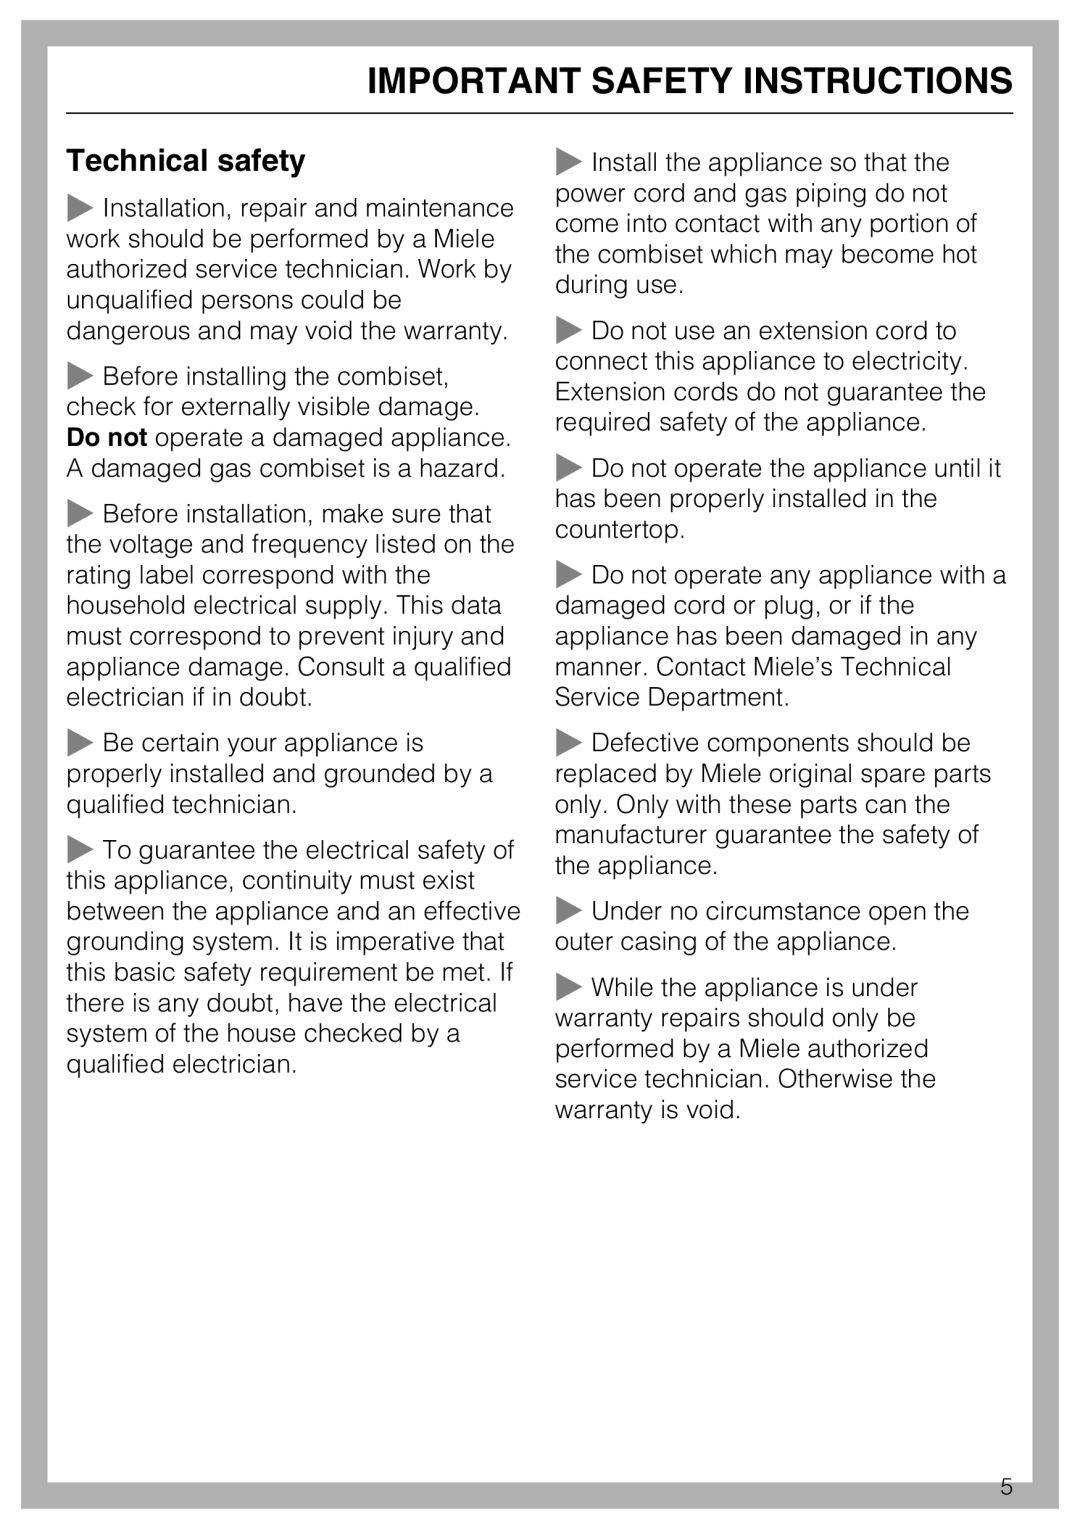 Miele CS 1012 installation instructions Technical safety, Important Safety Instructions 